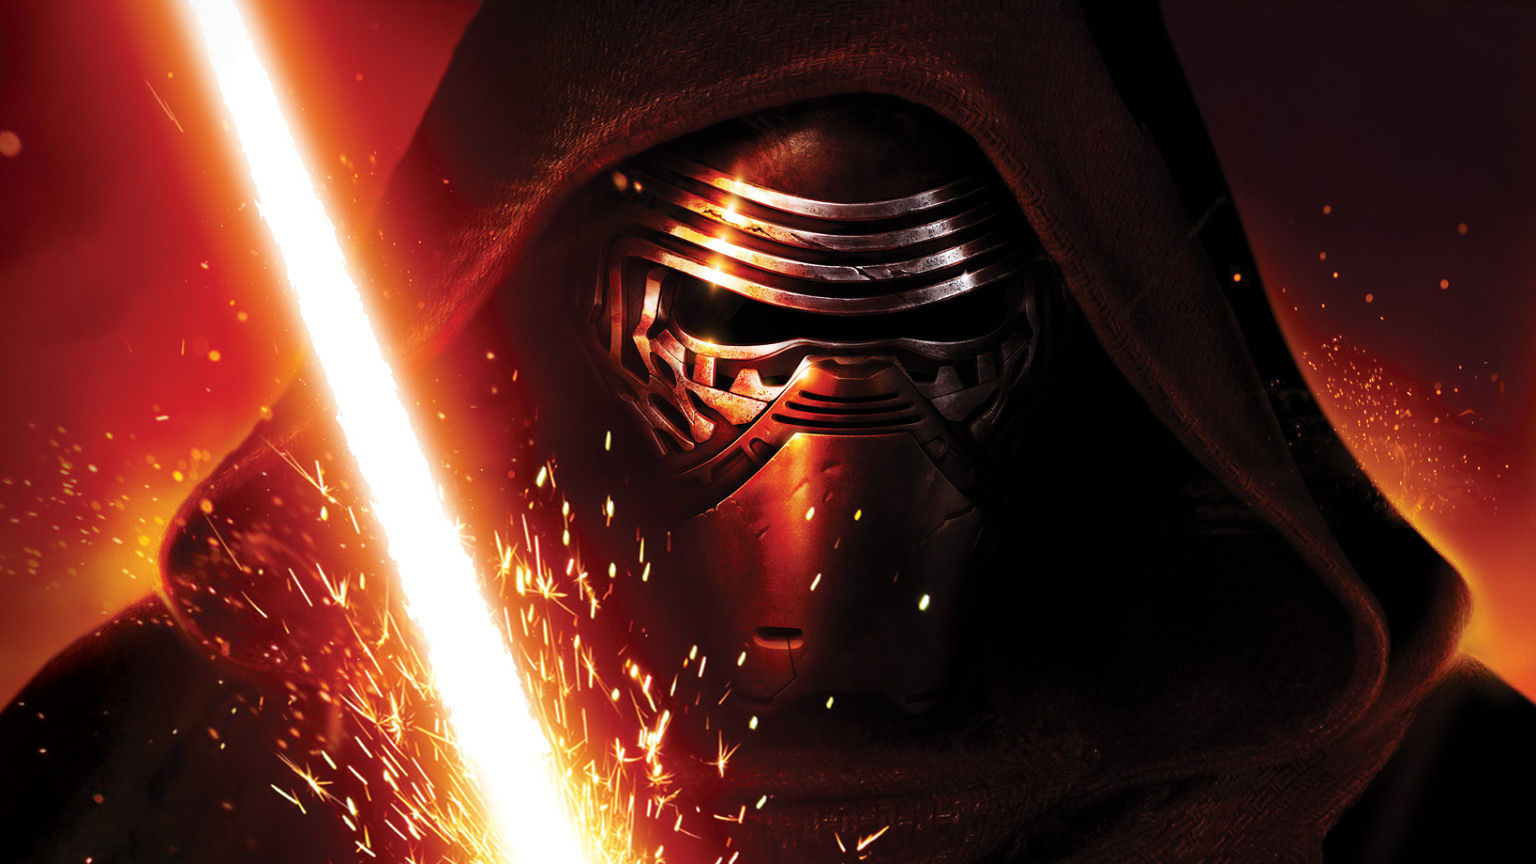 kylo ren wallpaper We provide the best collection of HD wallpapers 1536x864